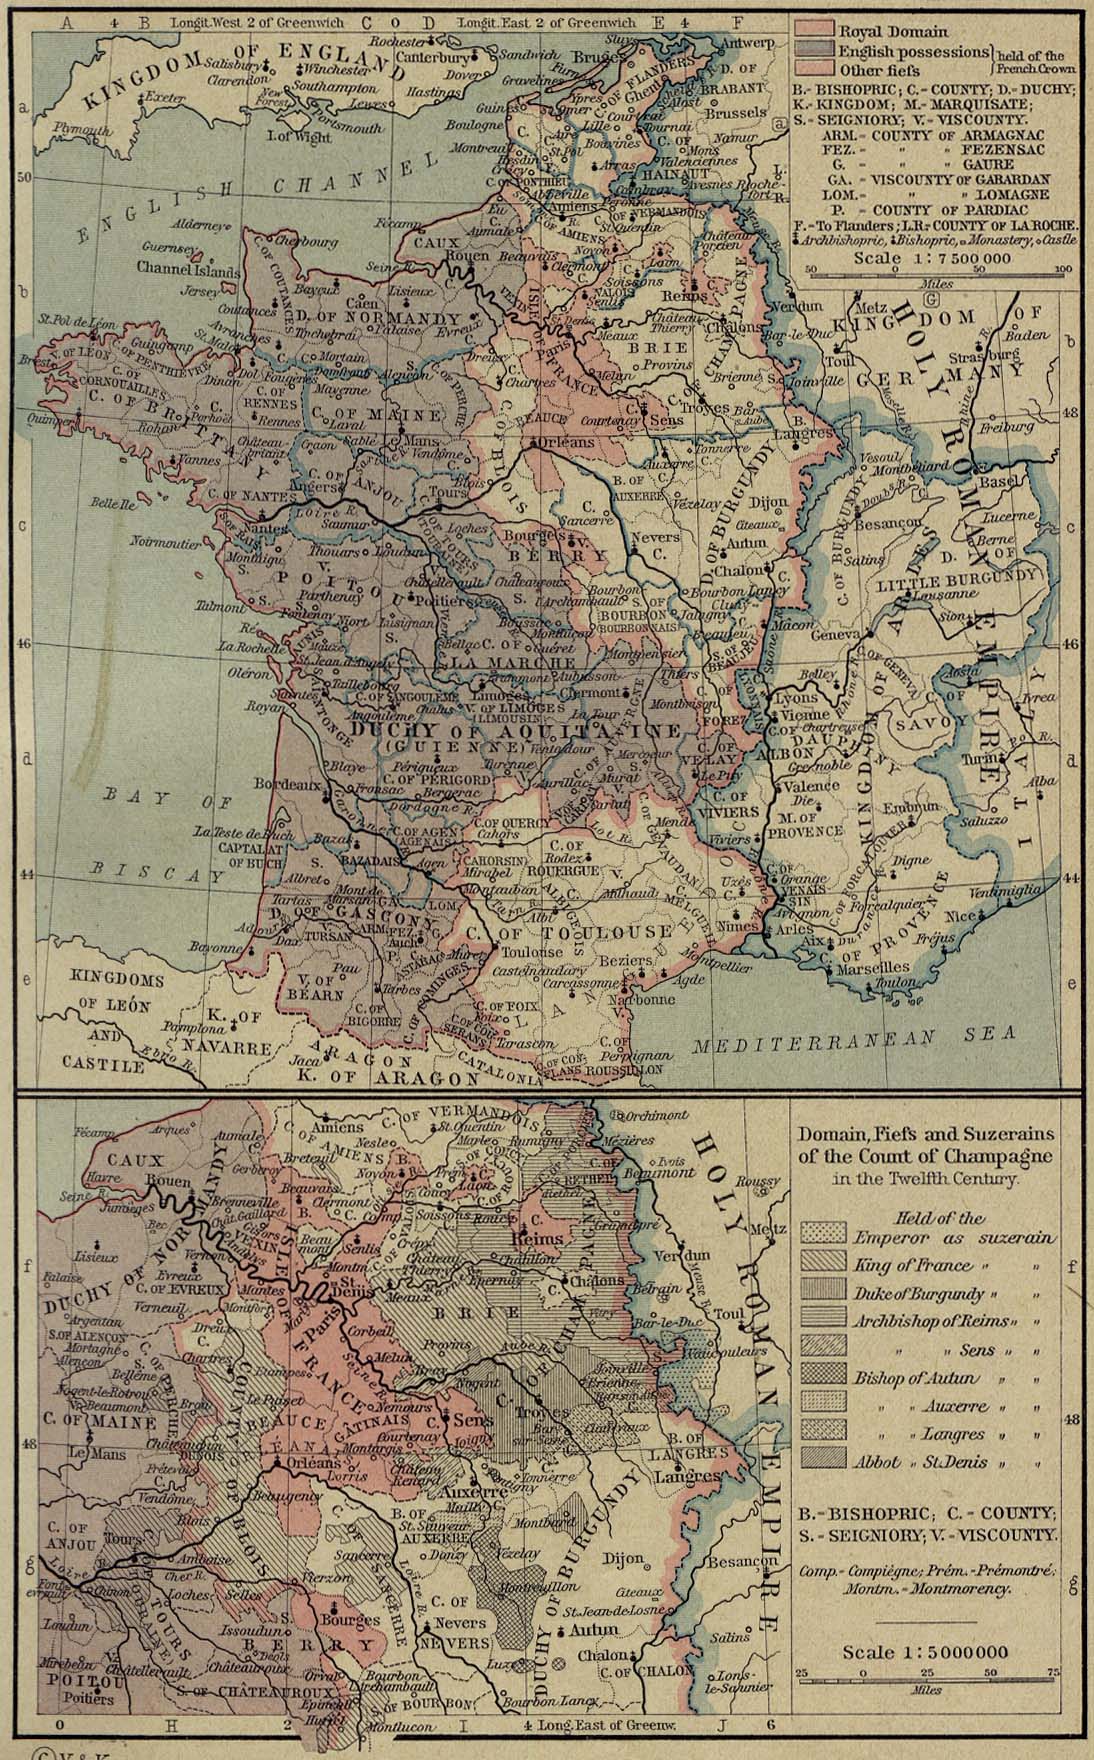 Map of France 1154-1184. Inset: Domain, Fiefs and Suzerains of the Count of Champagne in the Twelfth Century.